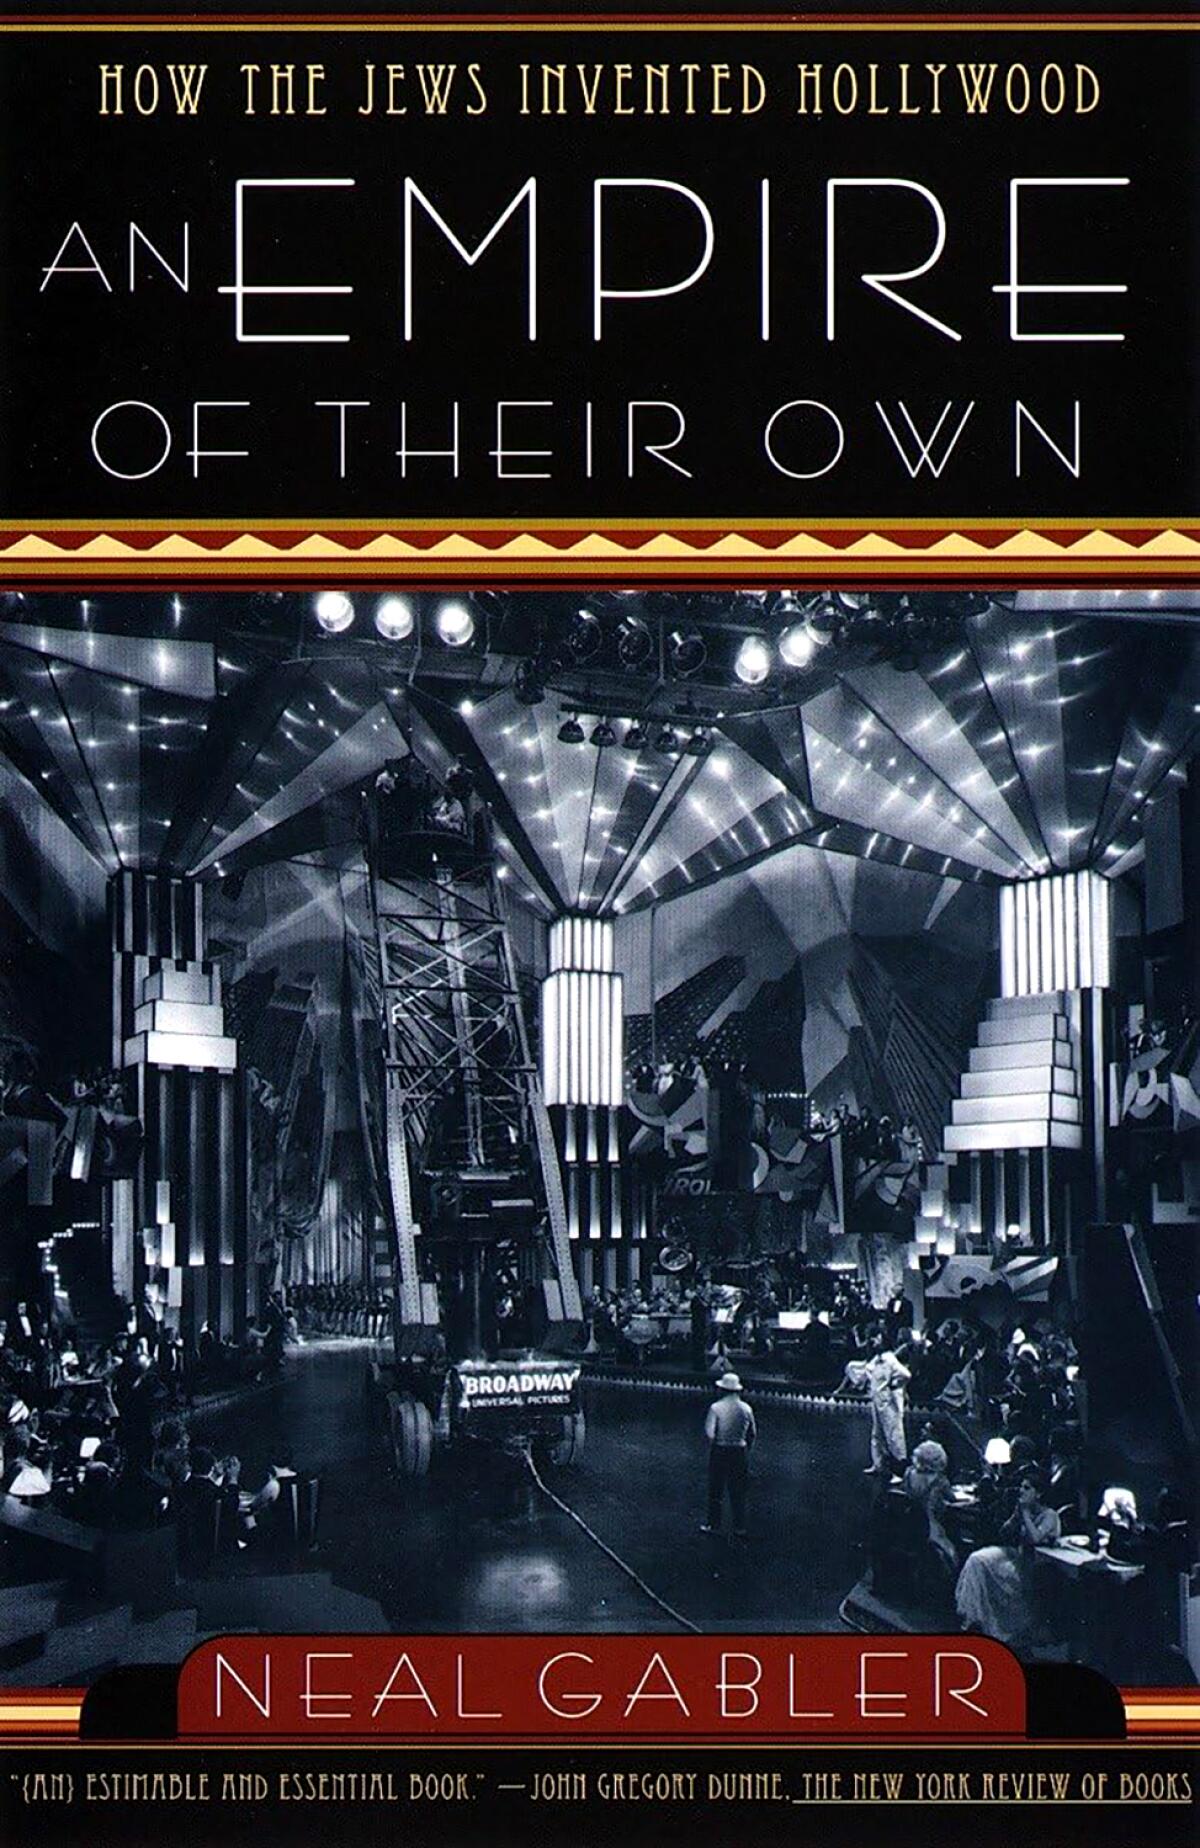 "An Empire of Their Own" by Neal Gabler, 1988